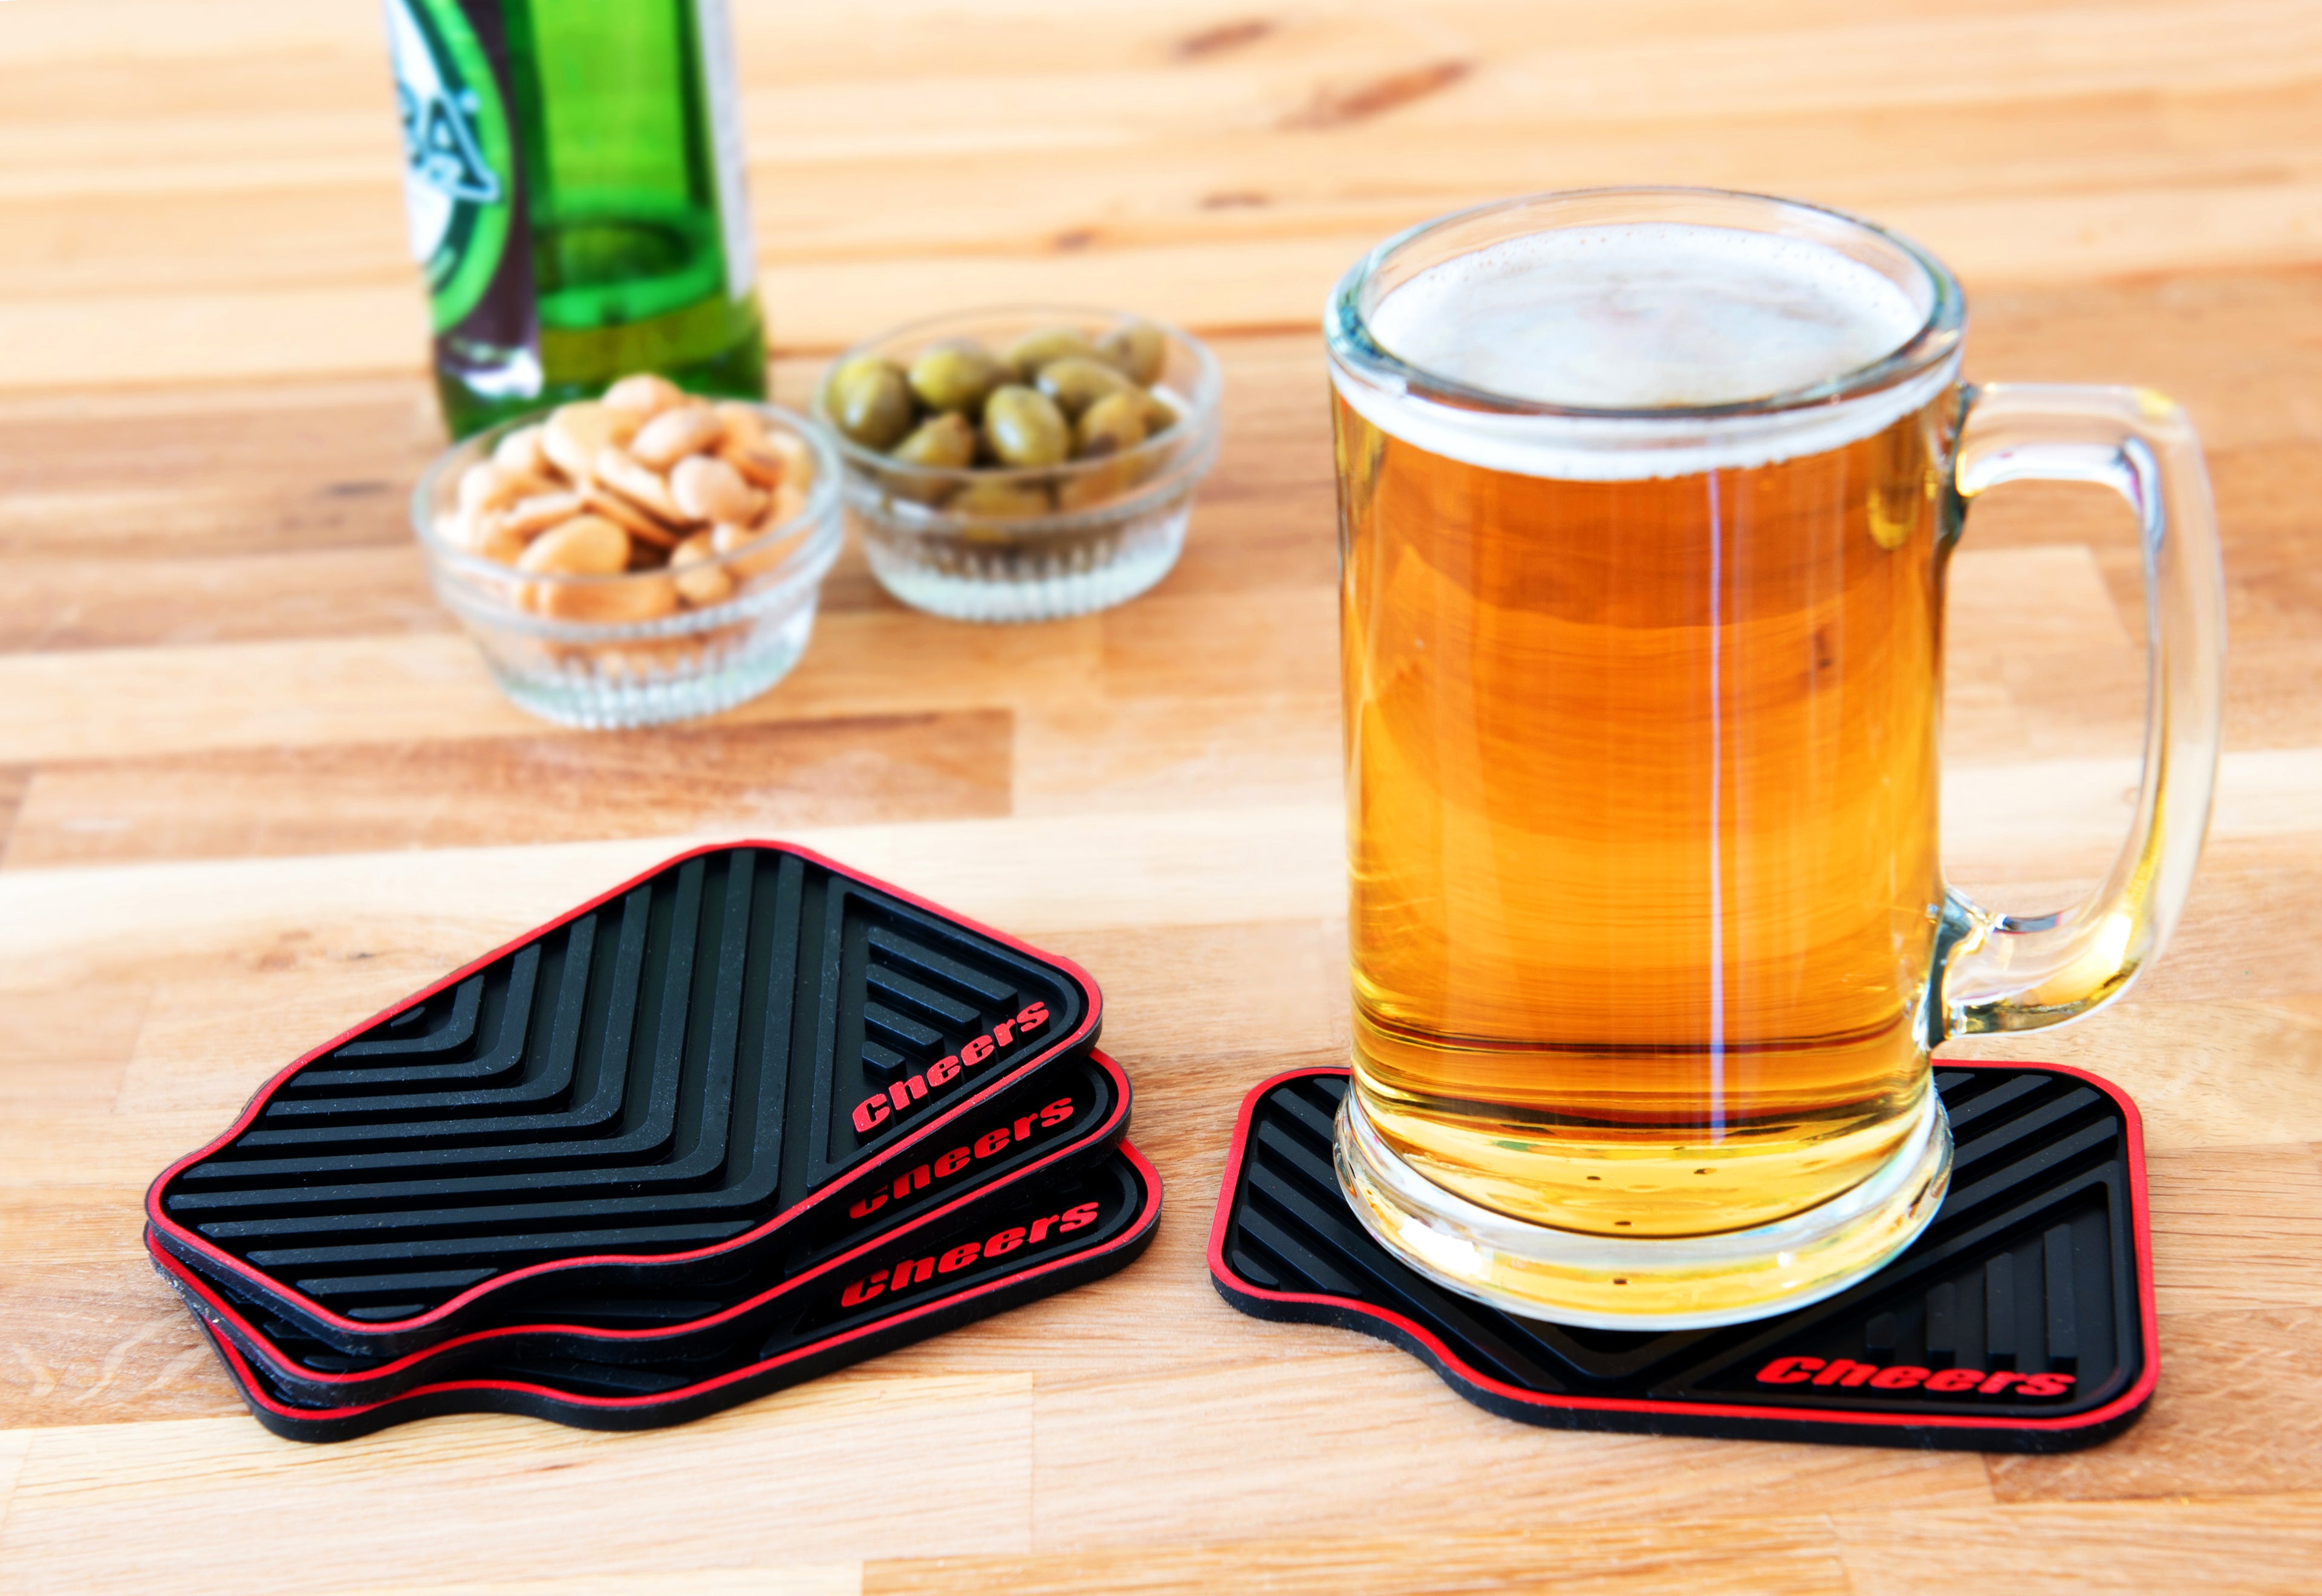 Silicone coasters - Cars Enthusiast Gifts for Men, Gifts Ideas for Car Lovers